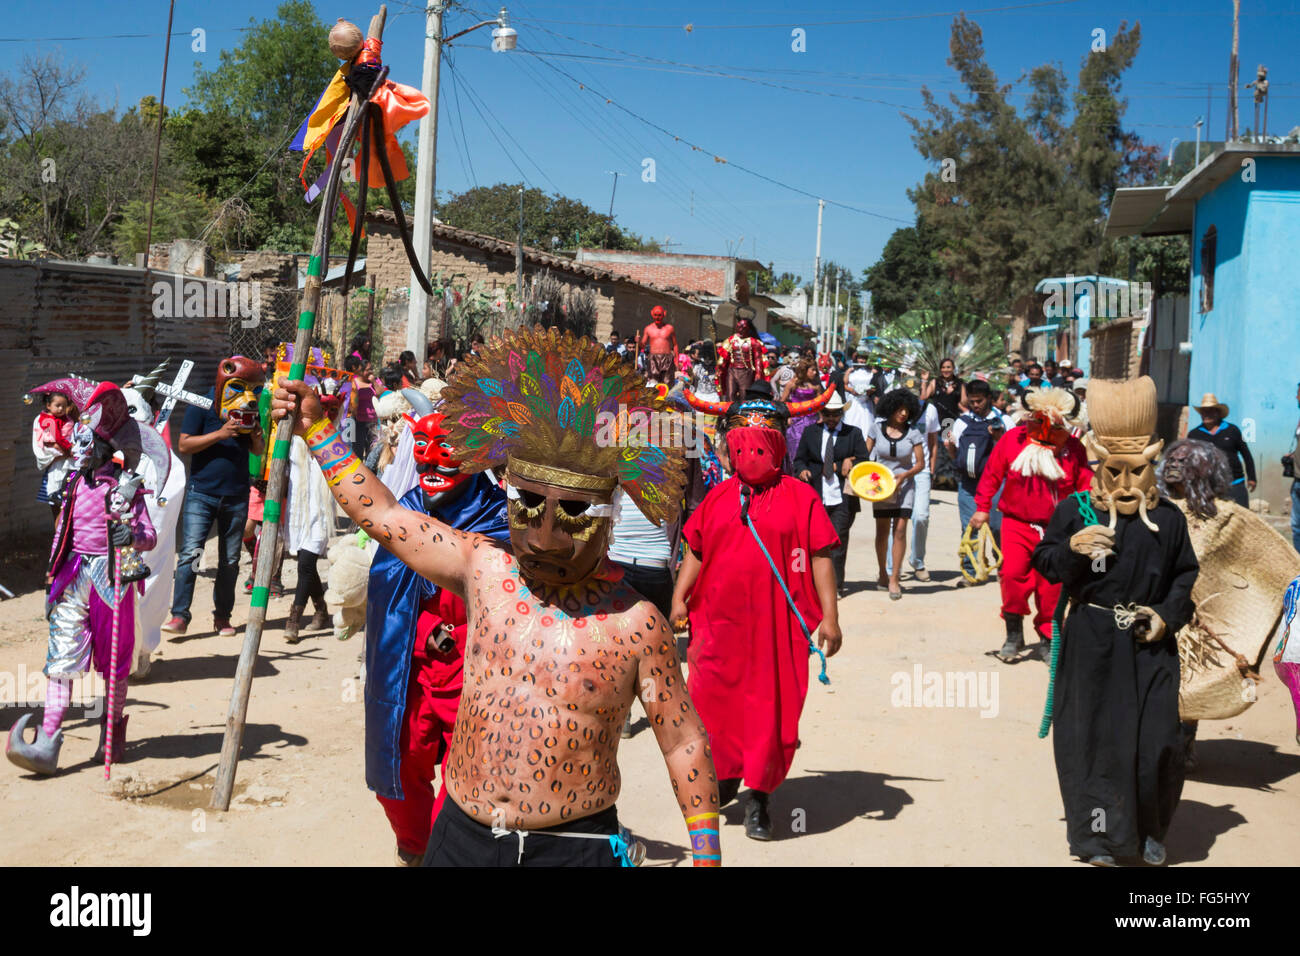 San Martín Tilcajete, Oaxaca, Mexico - Residents celebrate carnival on the day before Lent begins. Stock Photo